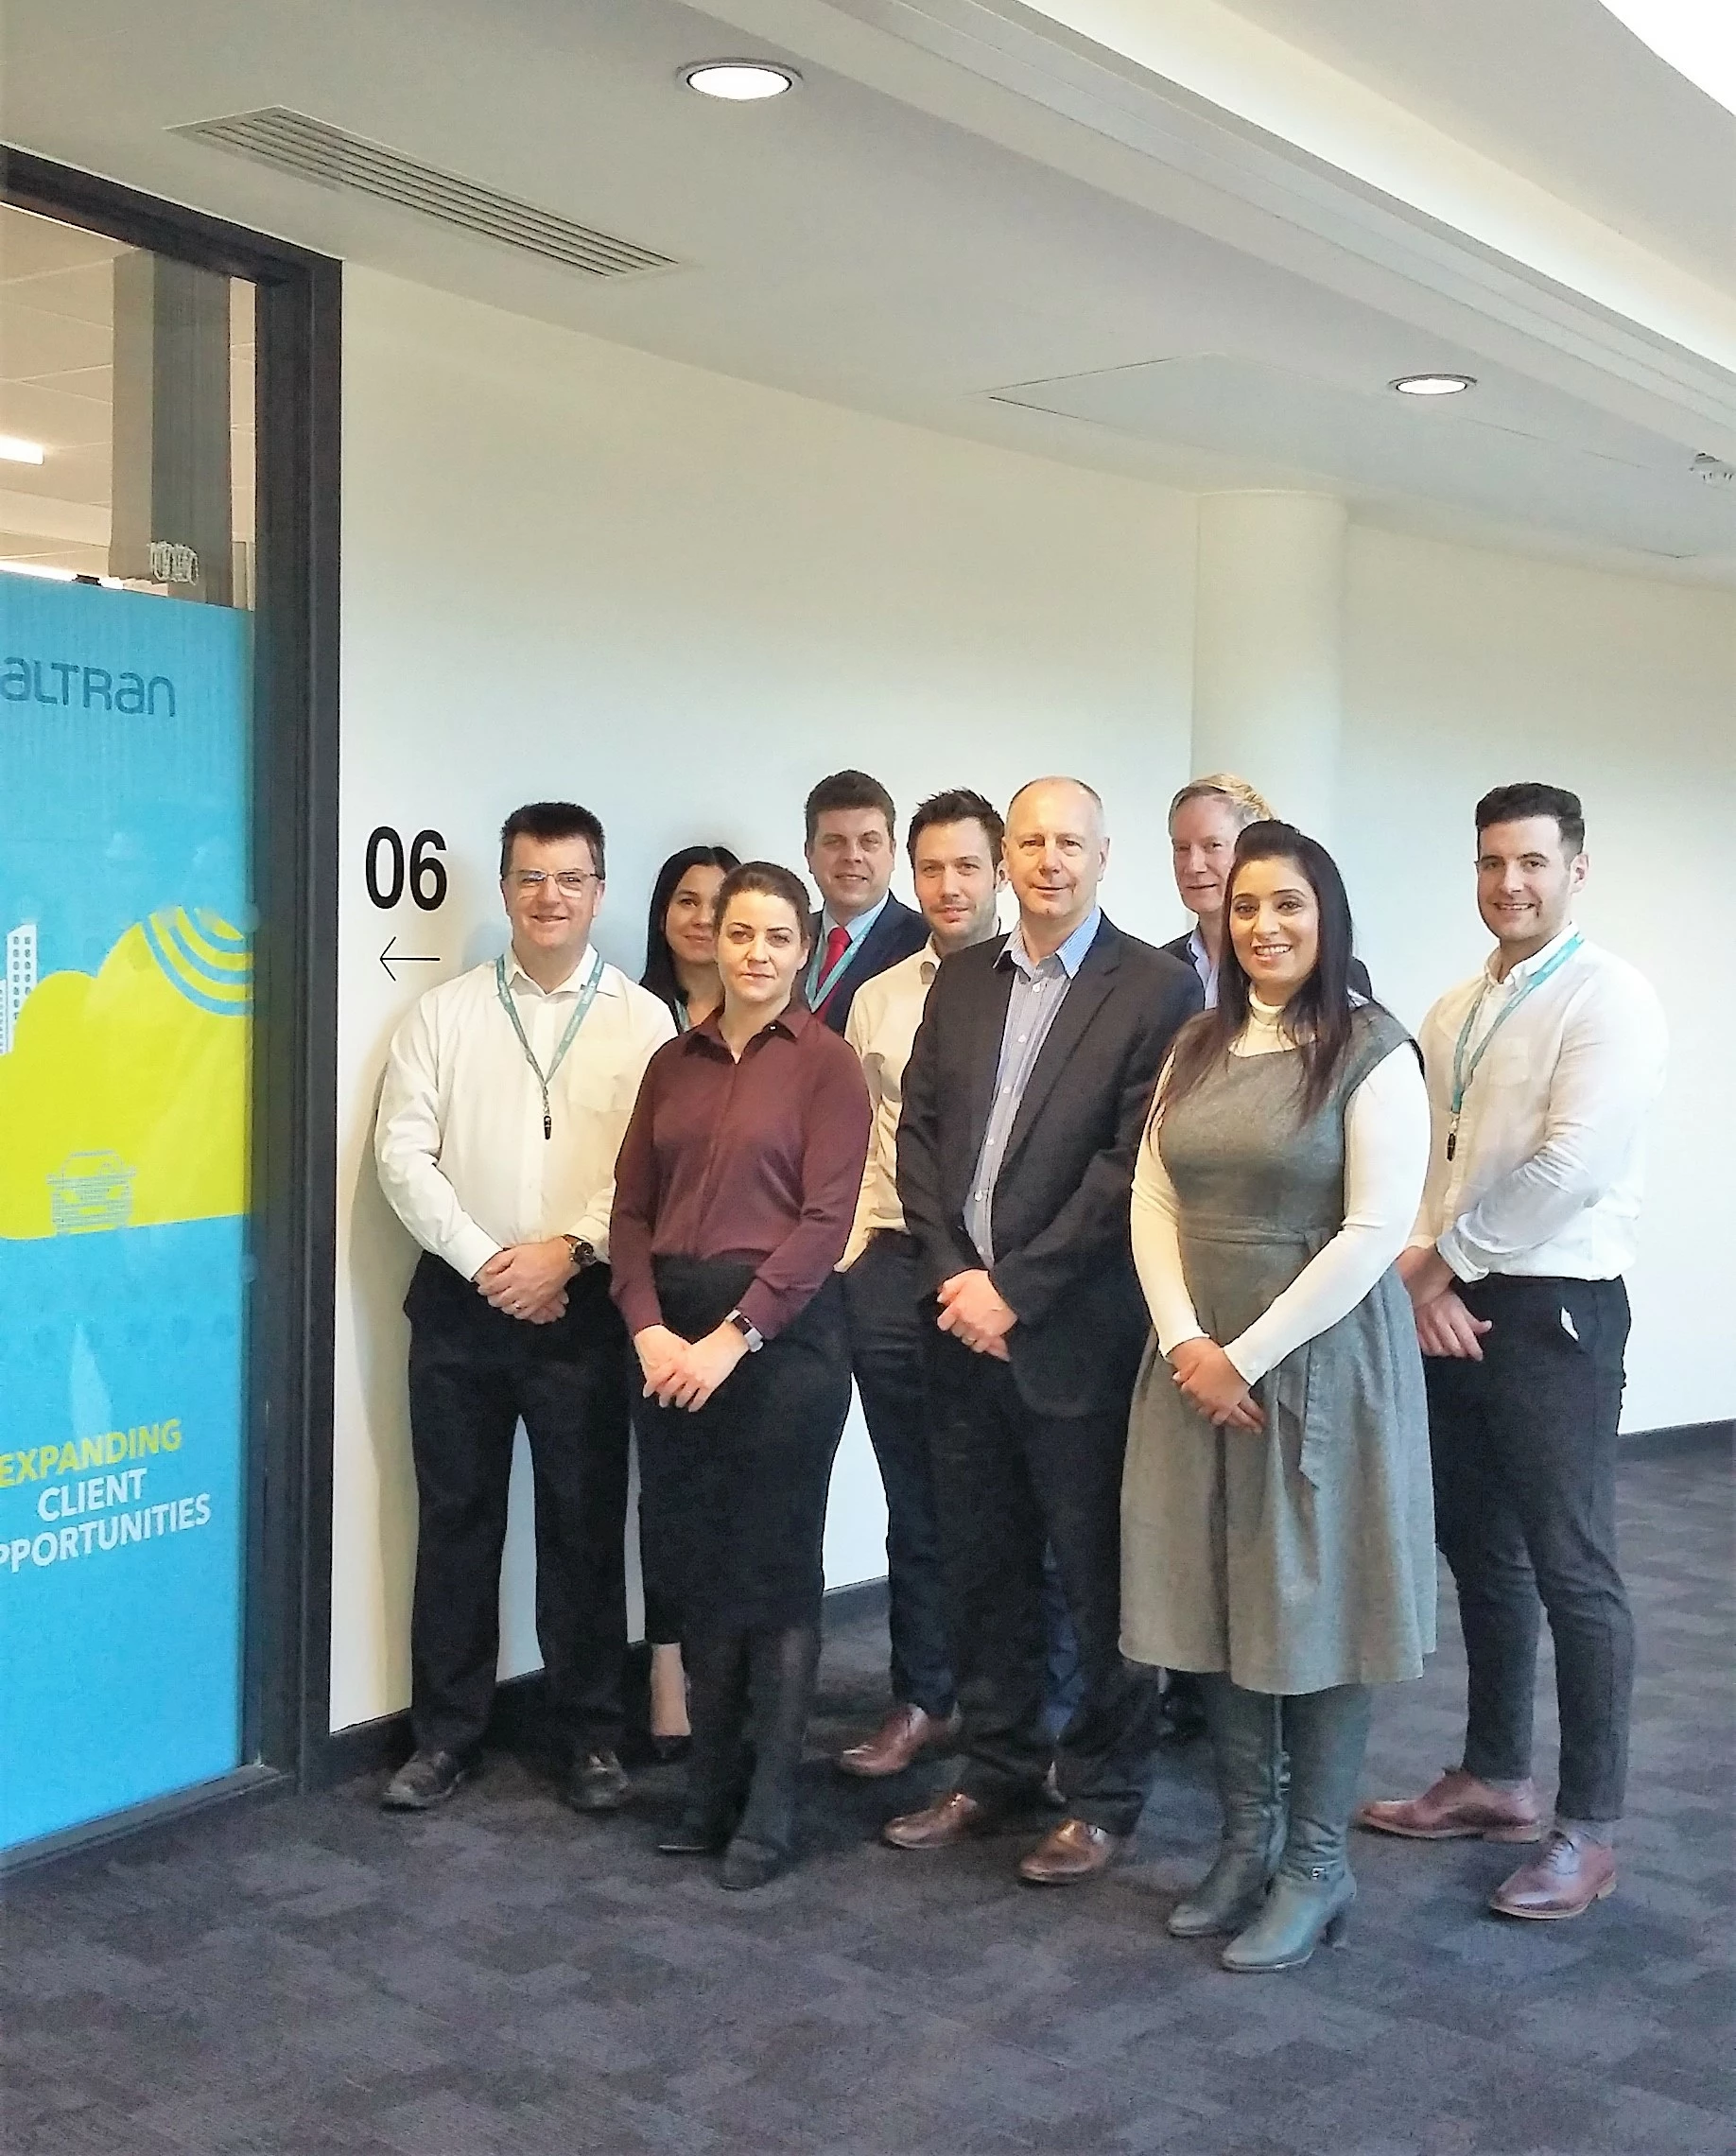 The Altran team at the iHub with head of Connect Derby, Ann Bhatti